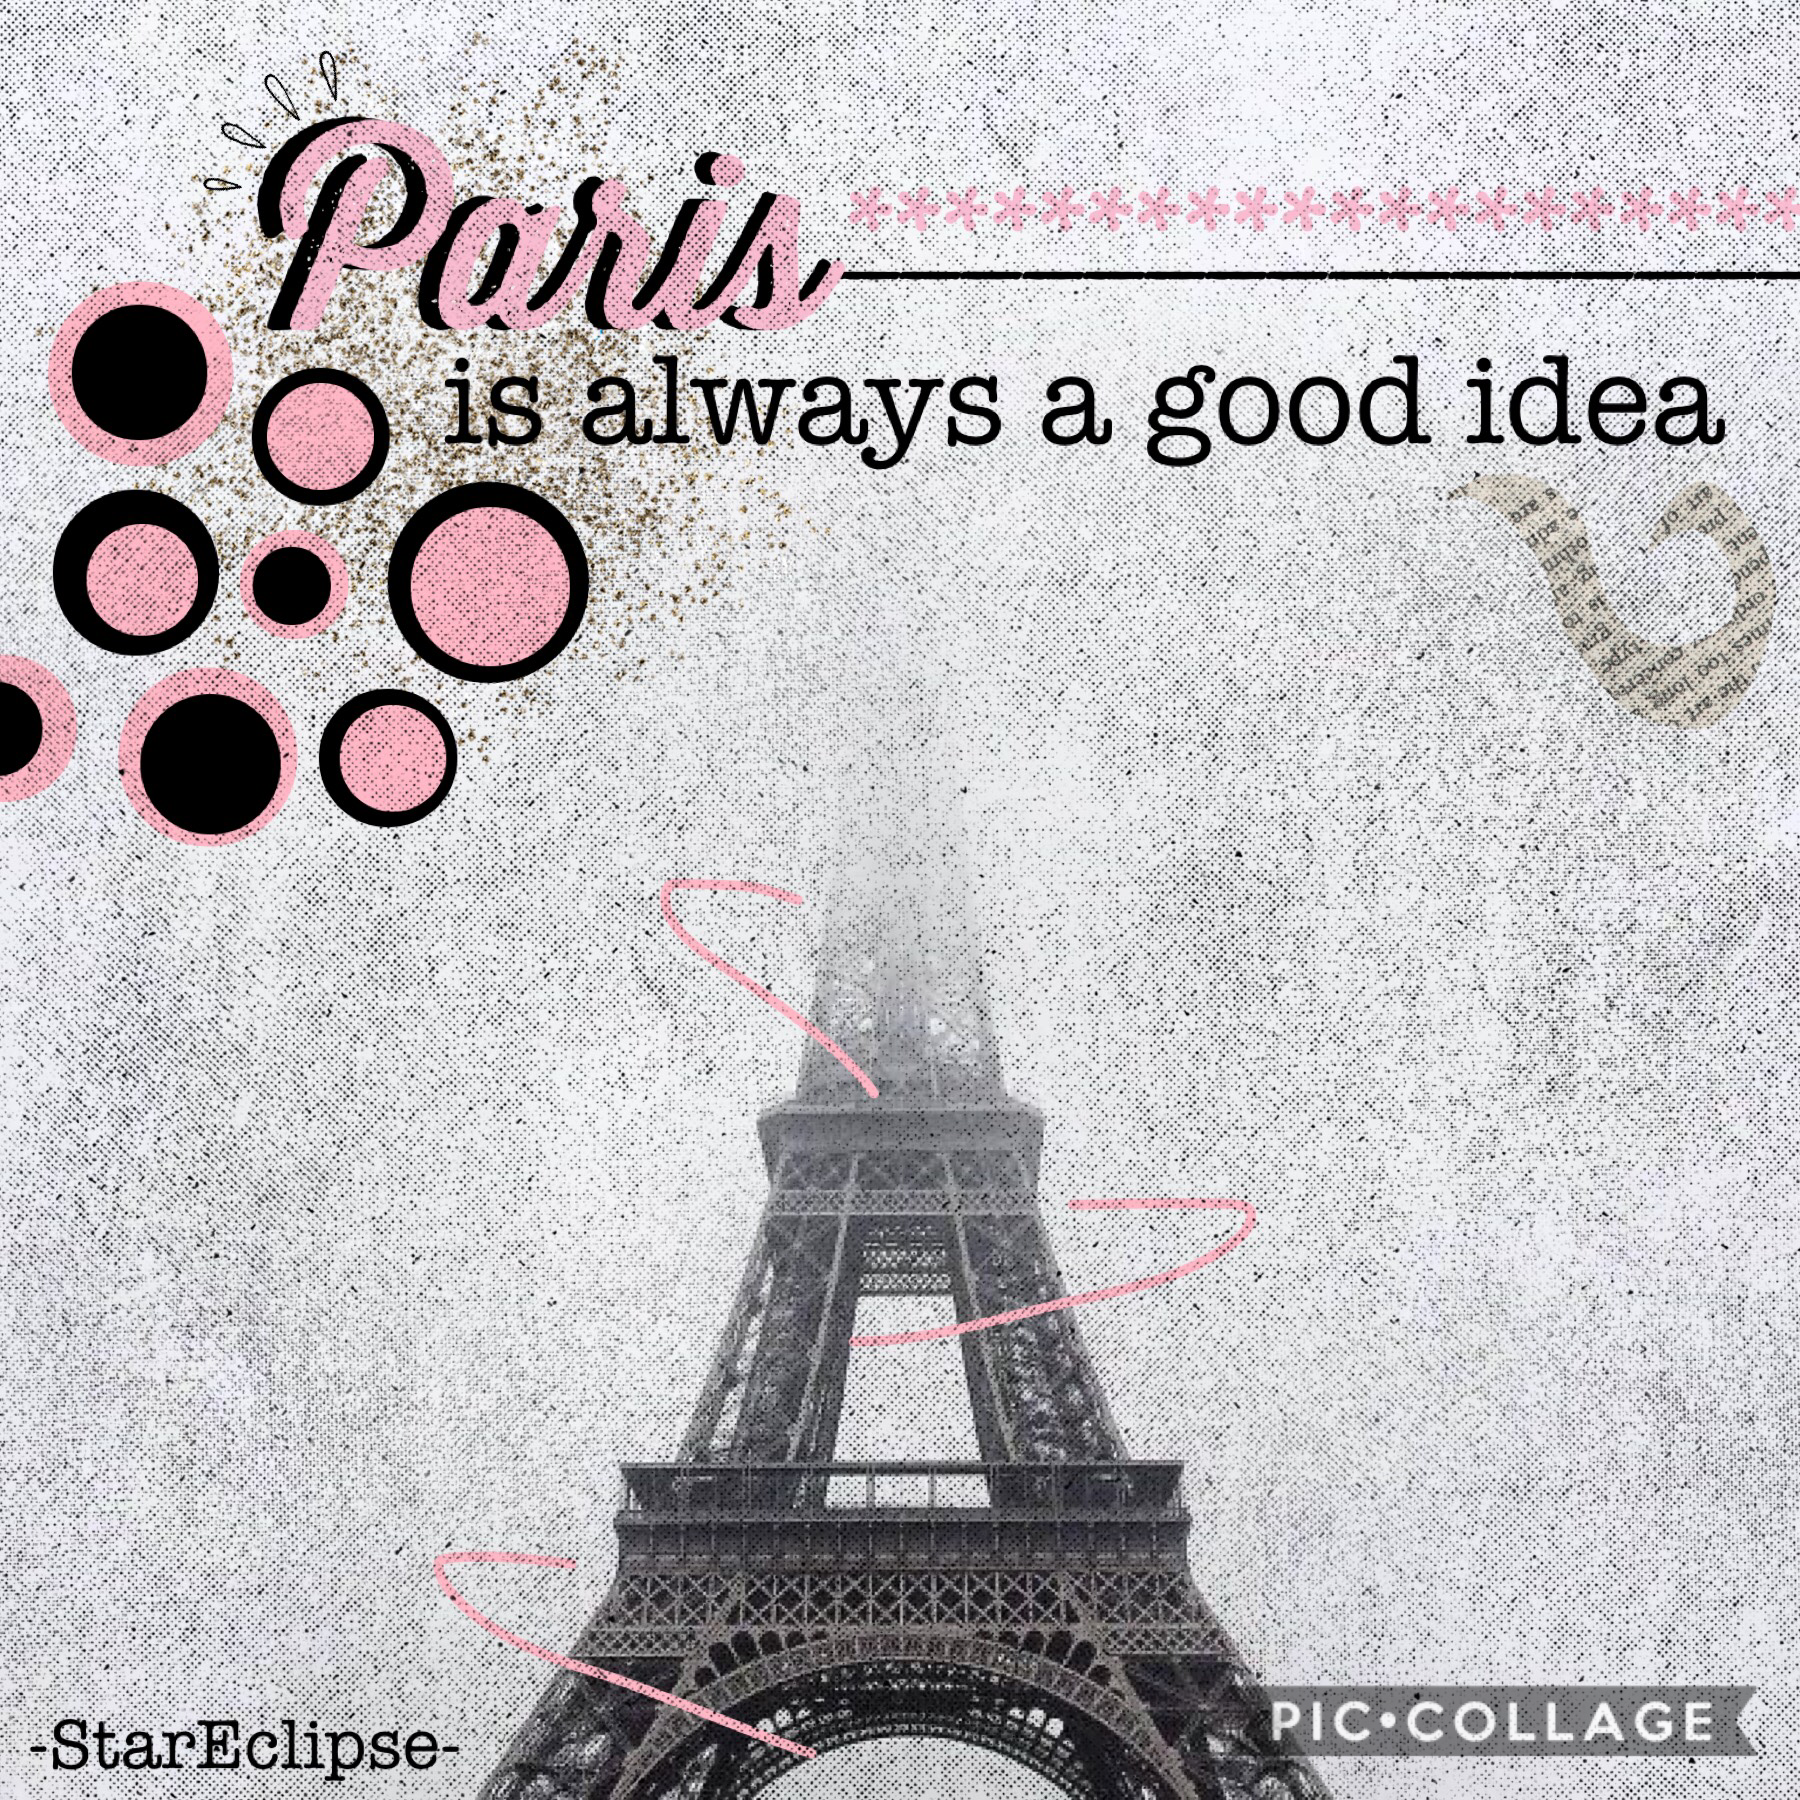 💖 Tap 💖
Paris themed collage! My first collage on this account! Do you like it? I think I'm gonna start posting more on this account! A new start 😂😁
QOTD: Wanna be friends? 
AOTD: I'd love to 😂💖💞